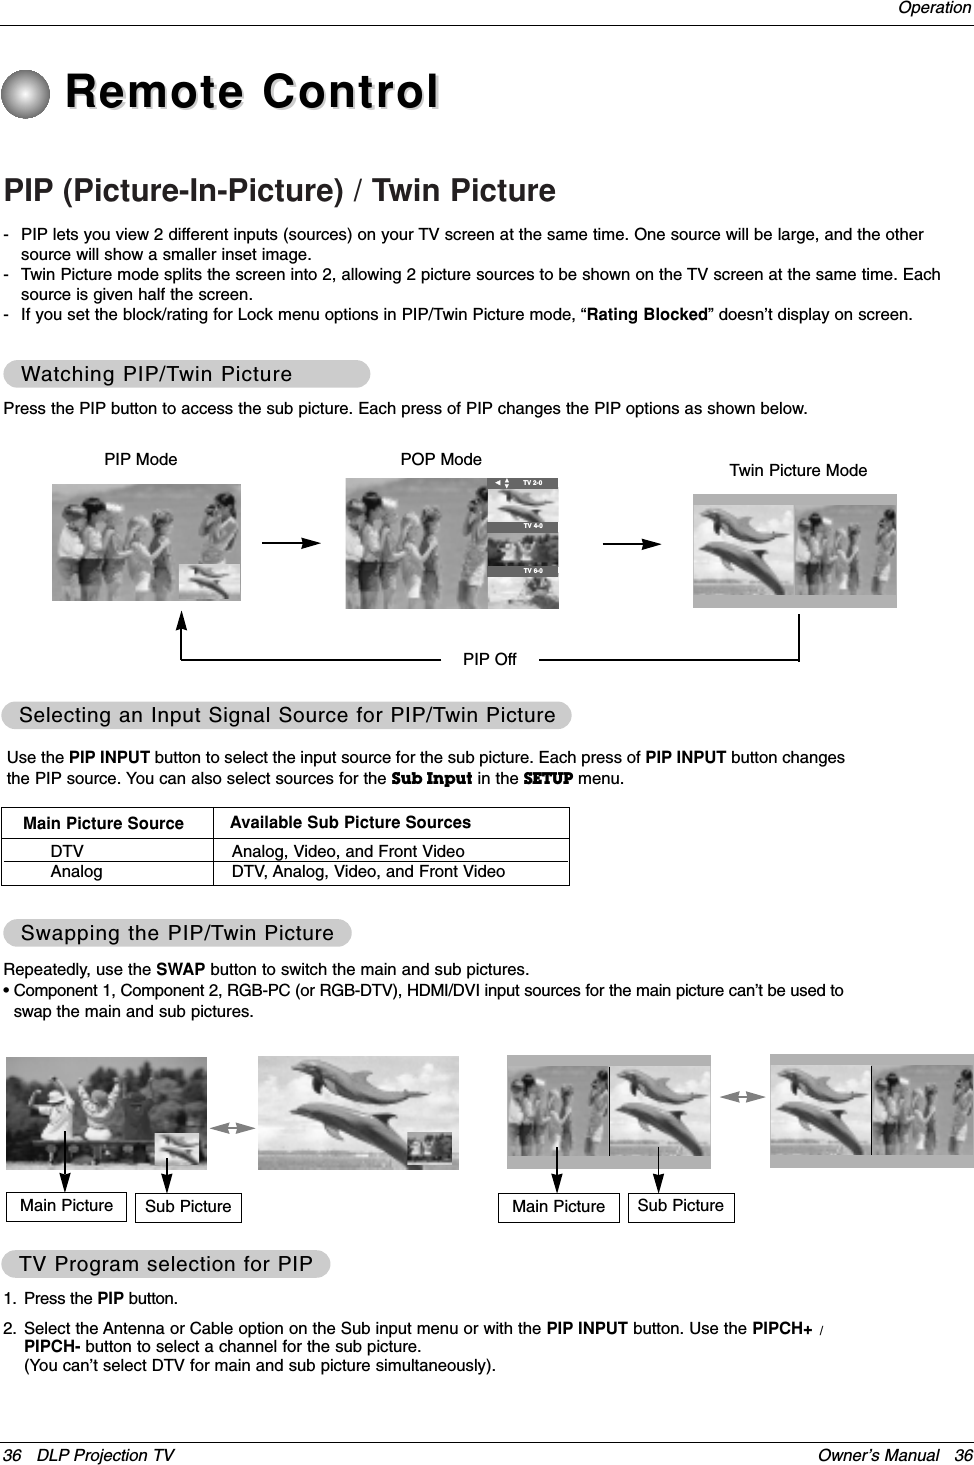 36 DLP Projection TV Owner’s Manual   36Operation- PIP lets you view 2 different inputs (sources) on your TV screen at the same time. One source will be large, and the othersource will show a smaller inset image.- Twin Picture mode splits the screen into 2, allowing 2 picture sources to be shown on the TV screen at the same time. Eachsource is given half the screen.- If you set the block/rating for Lock menu options in PIP/Twin Picture mode, “Rating Blocked” doesn’t display on screen.Press the PIP button to access the sub picture. Each press of PIP changes the PIP options as shown below.PIP OffPIP Mode POP Mode Twin Picture Mode1. Press the PIP button.2. Select the Antenna or Cable option on the Sub input menu or with the PIP INPUT button. Use the PIPCH+ /PIPCH- button to select a channel for the sub picture.(You can’t select DTV for main and sub picture simultaneously).Repeatedly, use the SWAP button to switch the main and sub pictures.•Component 1, Component 2, RGB-PC (or RGB-DTV), HDMI/DVI input sources for the main picture can’t be used toswap the main and sub pictures.Use the PIP INPUT button to select the input source for the sub picture. Each press of PIP INPUT button changesthe PIP source. You can also select sources for the Sub Input in the SETUP menu.Main Picture Source Available Sub Picture SourcesDTV Analog Analog, Video, and Front VideoDTV, Analog, Video, and Front VideoSub Picture Main Picture Sub PictureF  TV 2-0TV 4-0TV 6-0E DMain PictureRemote ControlRemote ControlPIP (Picture-In-Picture) / Twin PictureWWatching PIP/Tatching PIP/Twin Picturewin PictureSelecting an Input Signal Source for PIP/TSelecting an Input Signal Source for PIP/Twin Picturewin PictureSwapping the PIPSwapping the PIP/T/Twin Picturewin PictureTV Program selection for PIPTV Program selection for PIP